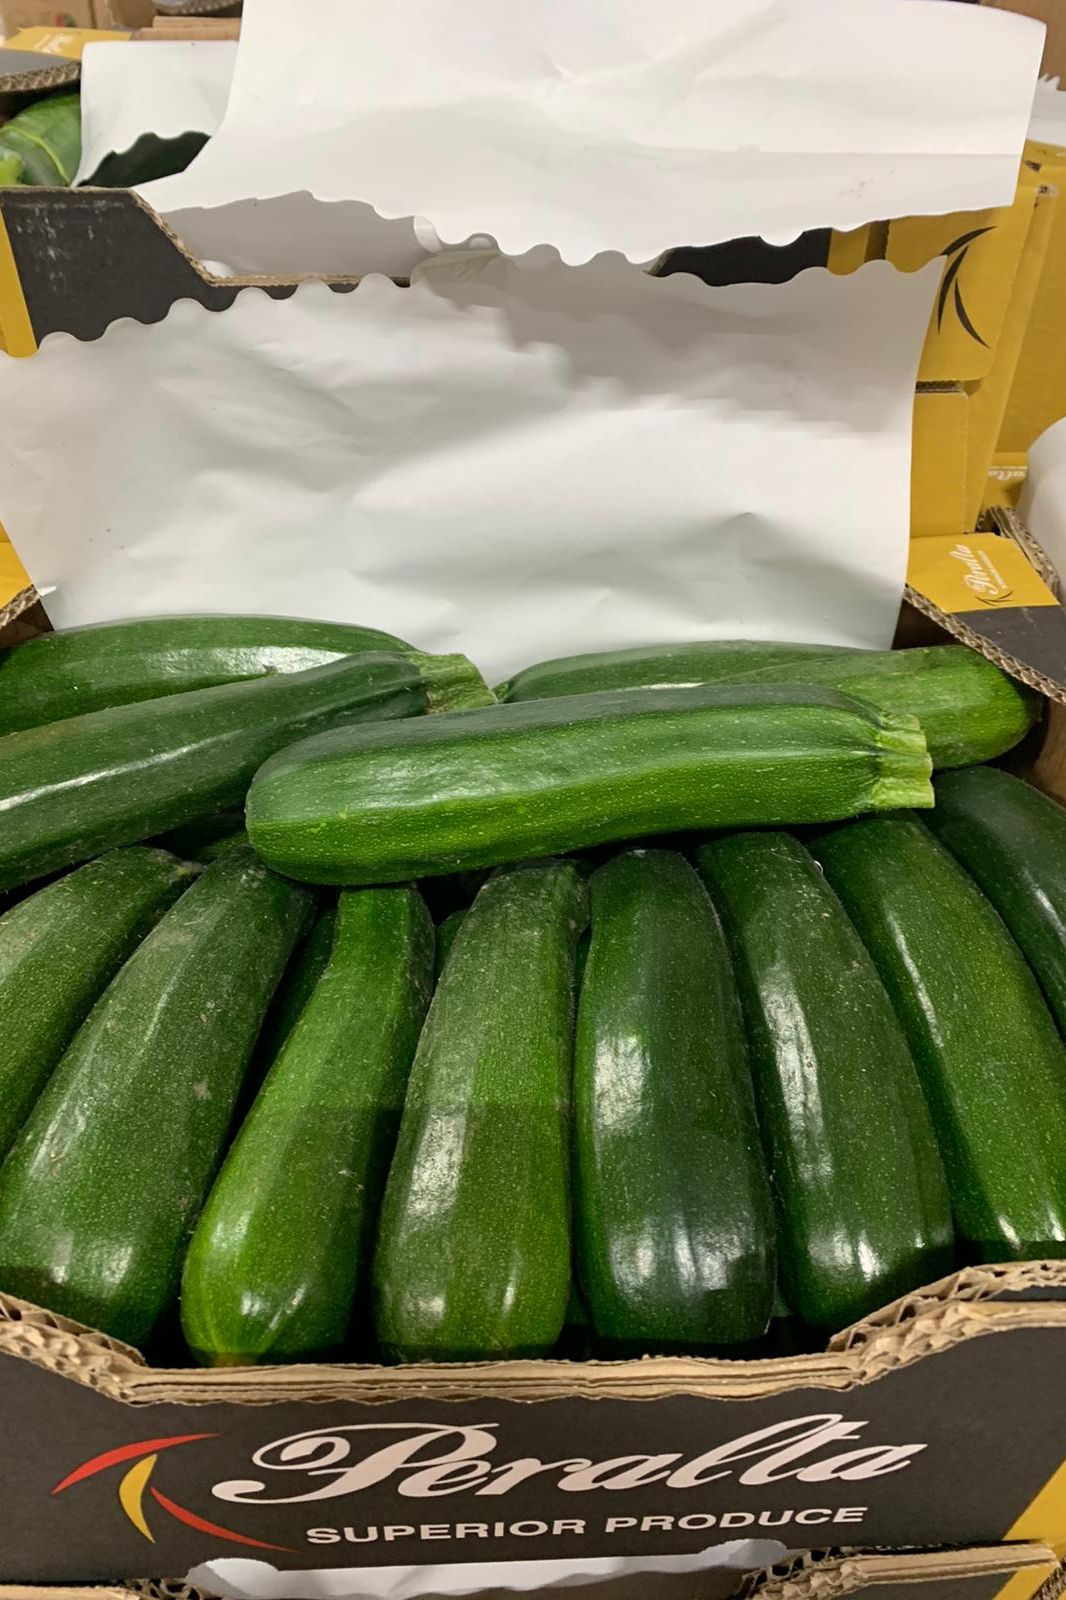 Courgette green x5kg Box - Jackie Leonards